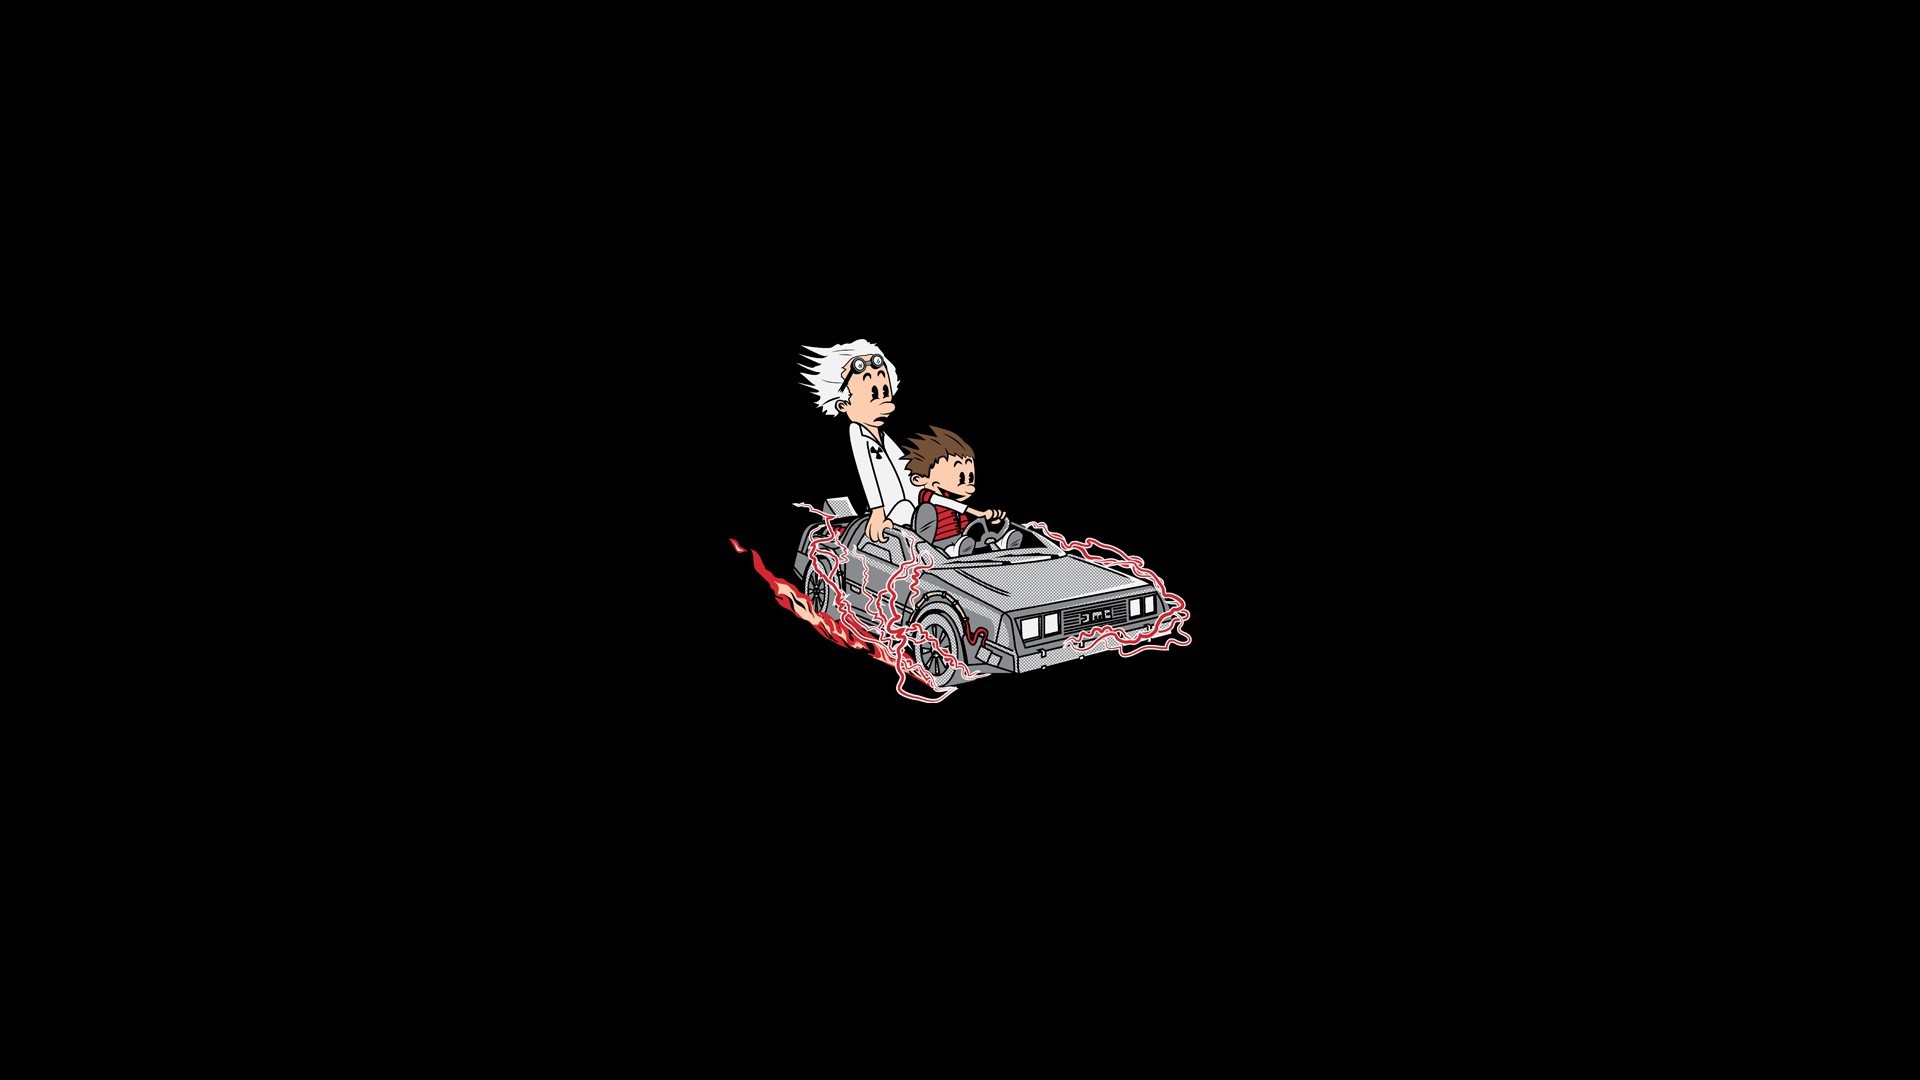 General 1920x1080 Back to the Future Calvin and Hobbes minimalism humor simple background Time Machine crossover cartoon car vehicle DeLorean silver cars movies artwork